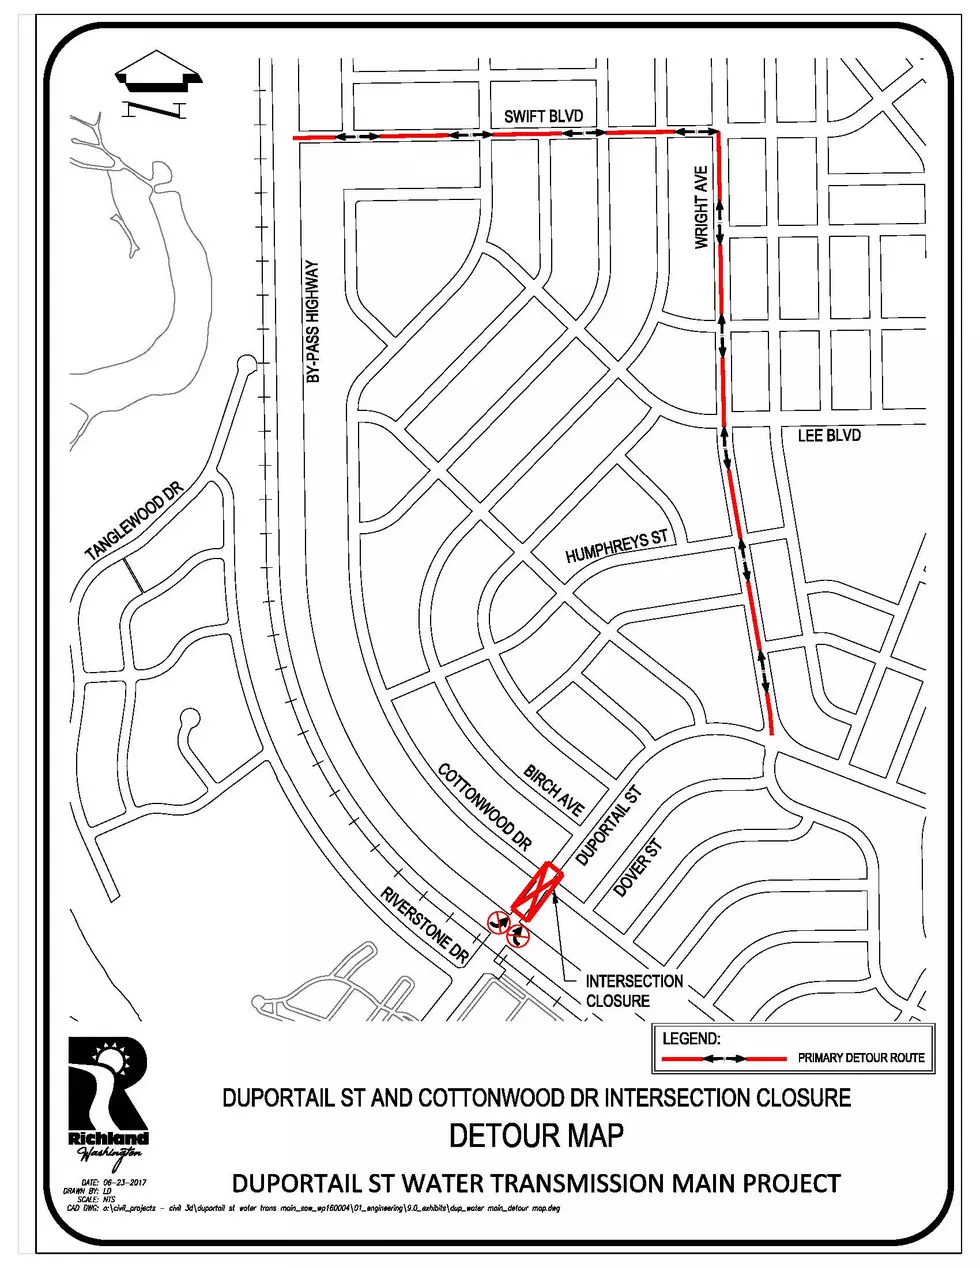 Duportail and Cottonwood Detour Starting Tuesday in Richland